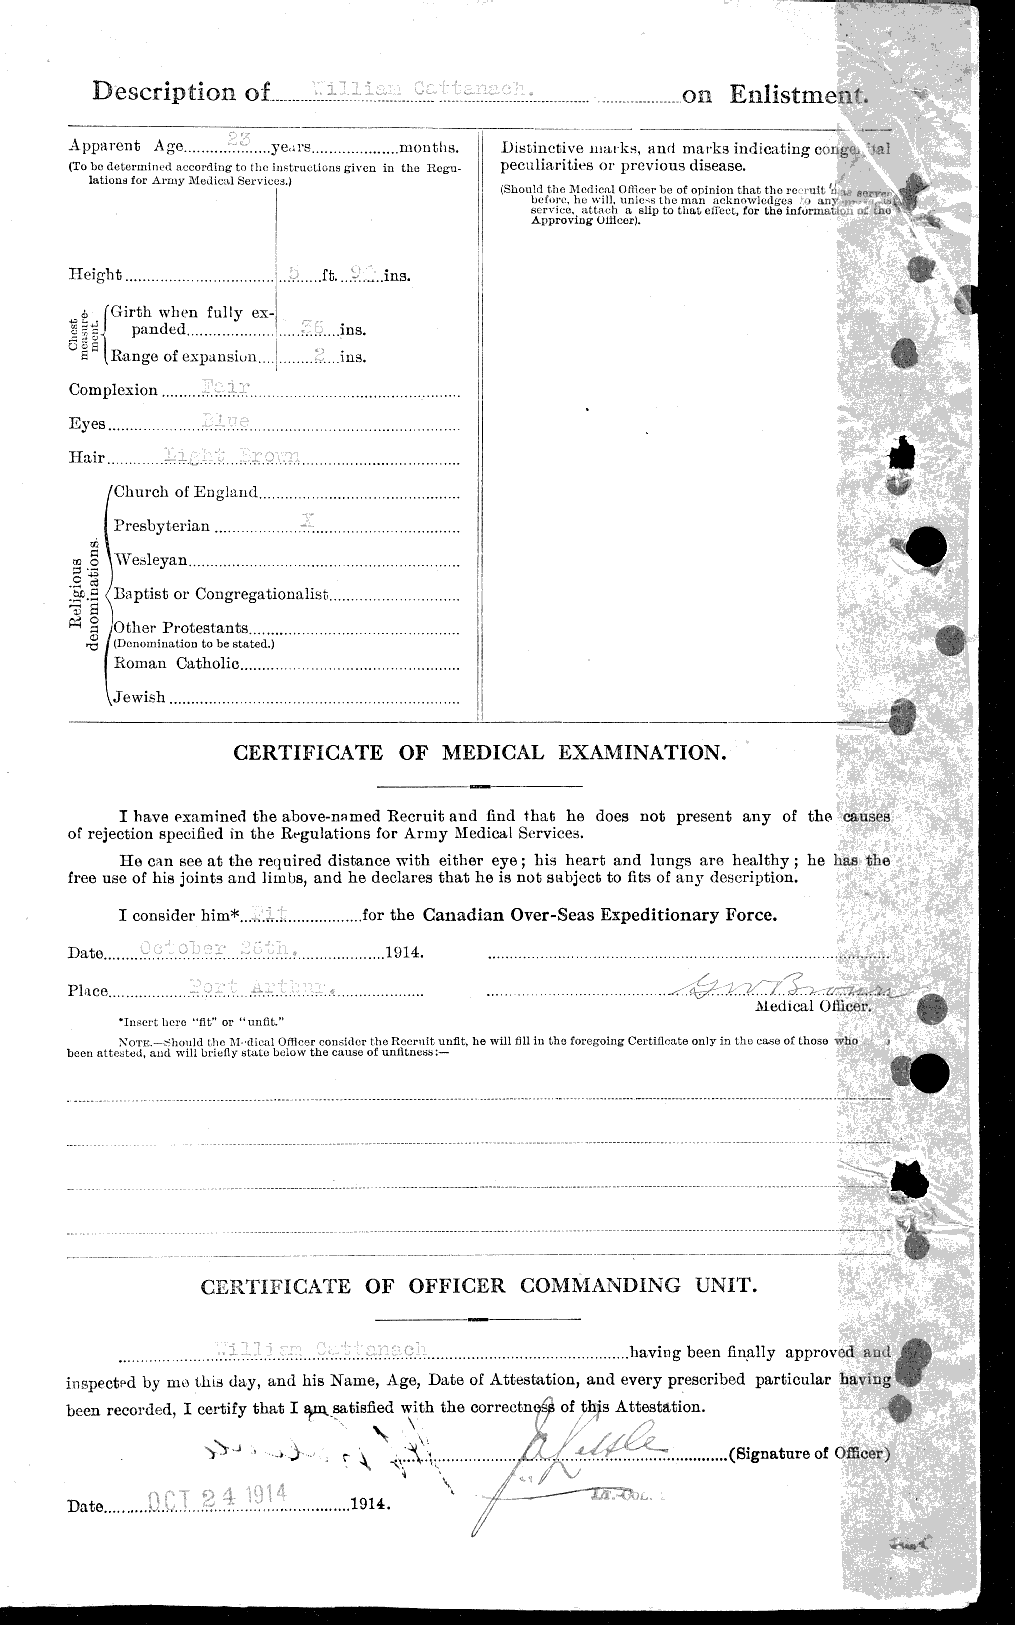 Personnel Records of the First World War - CEF 013314b